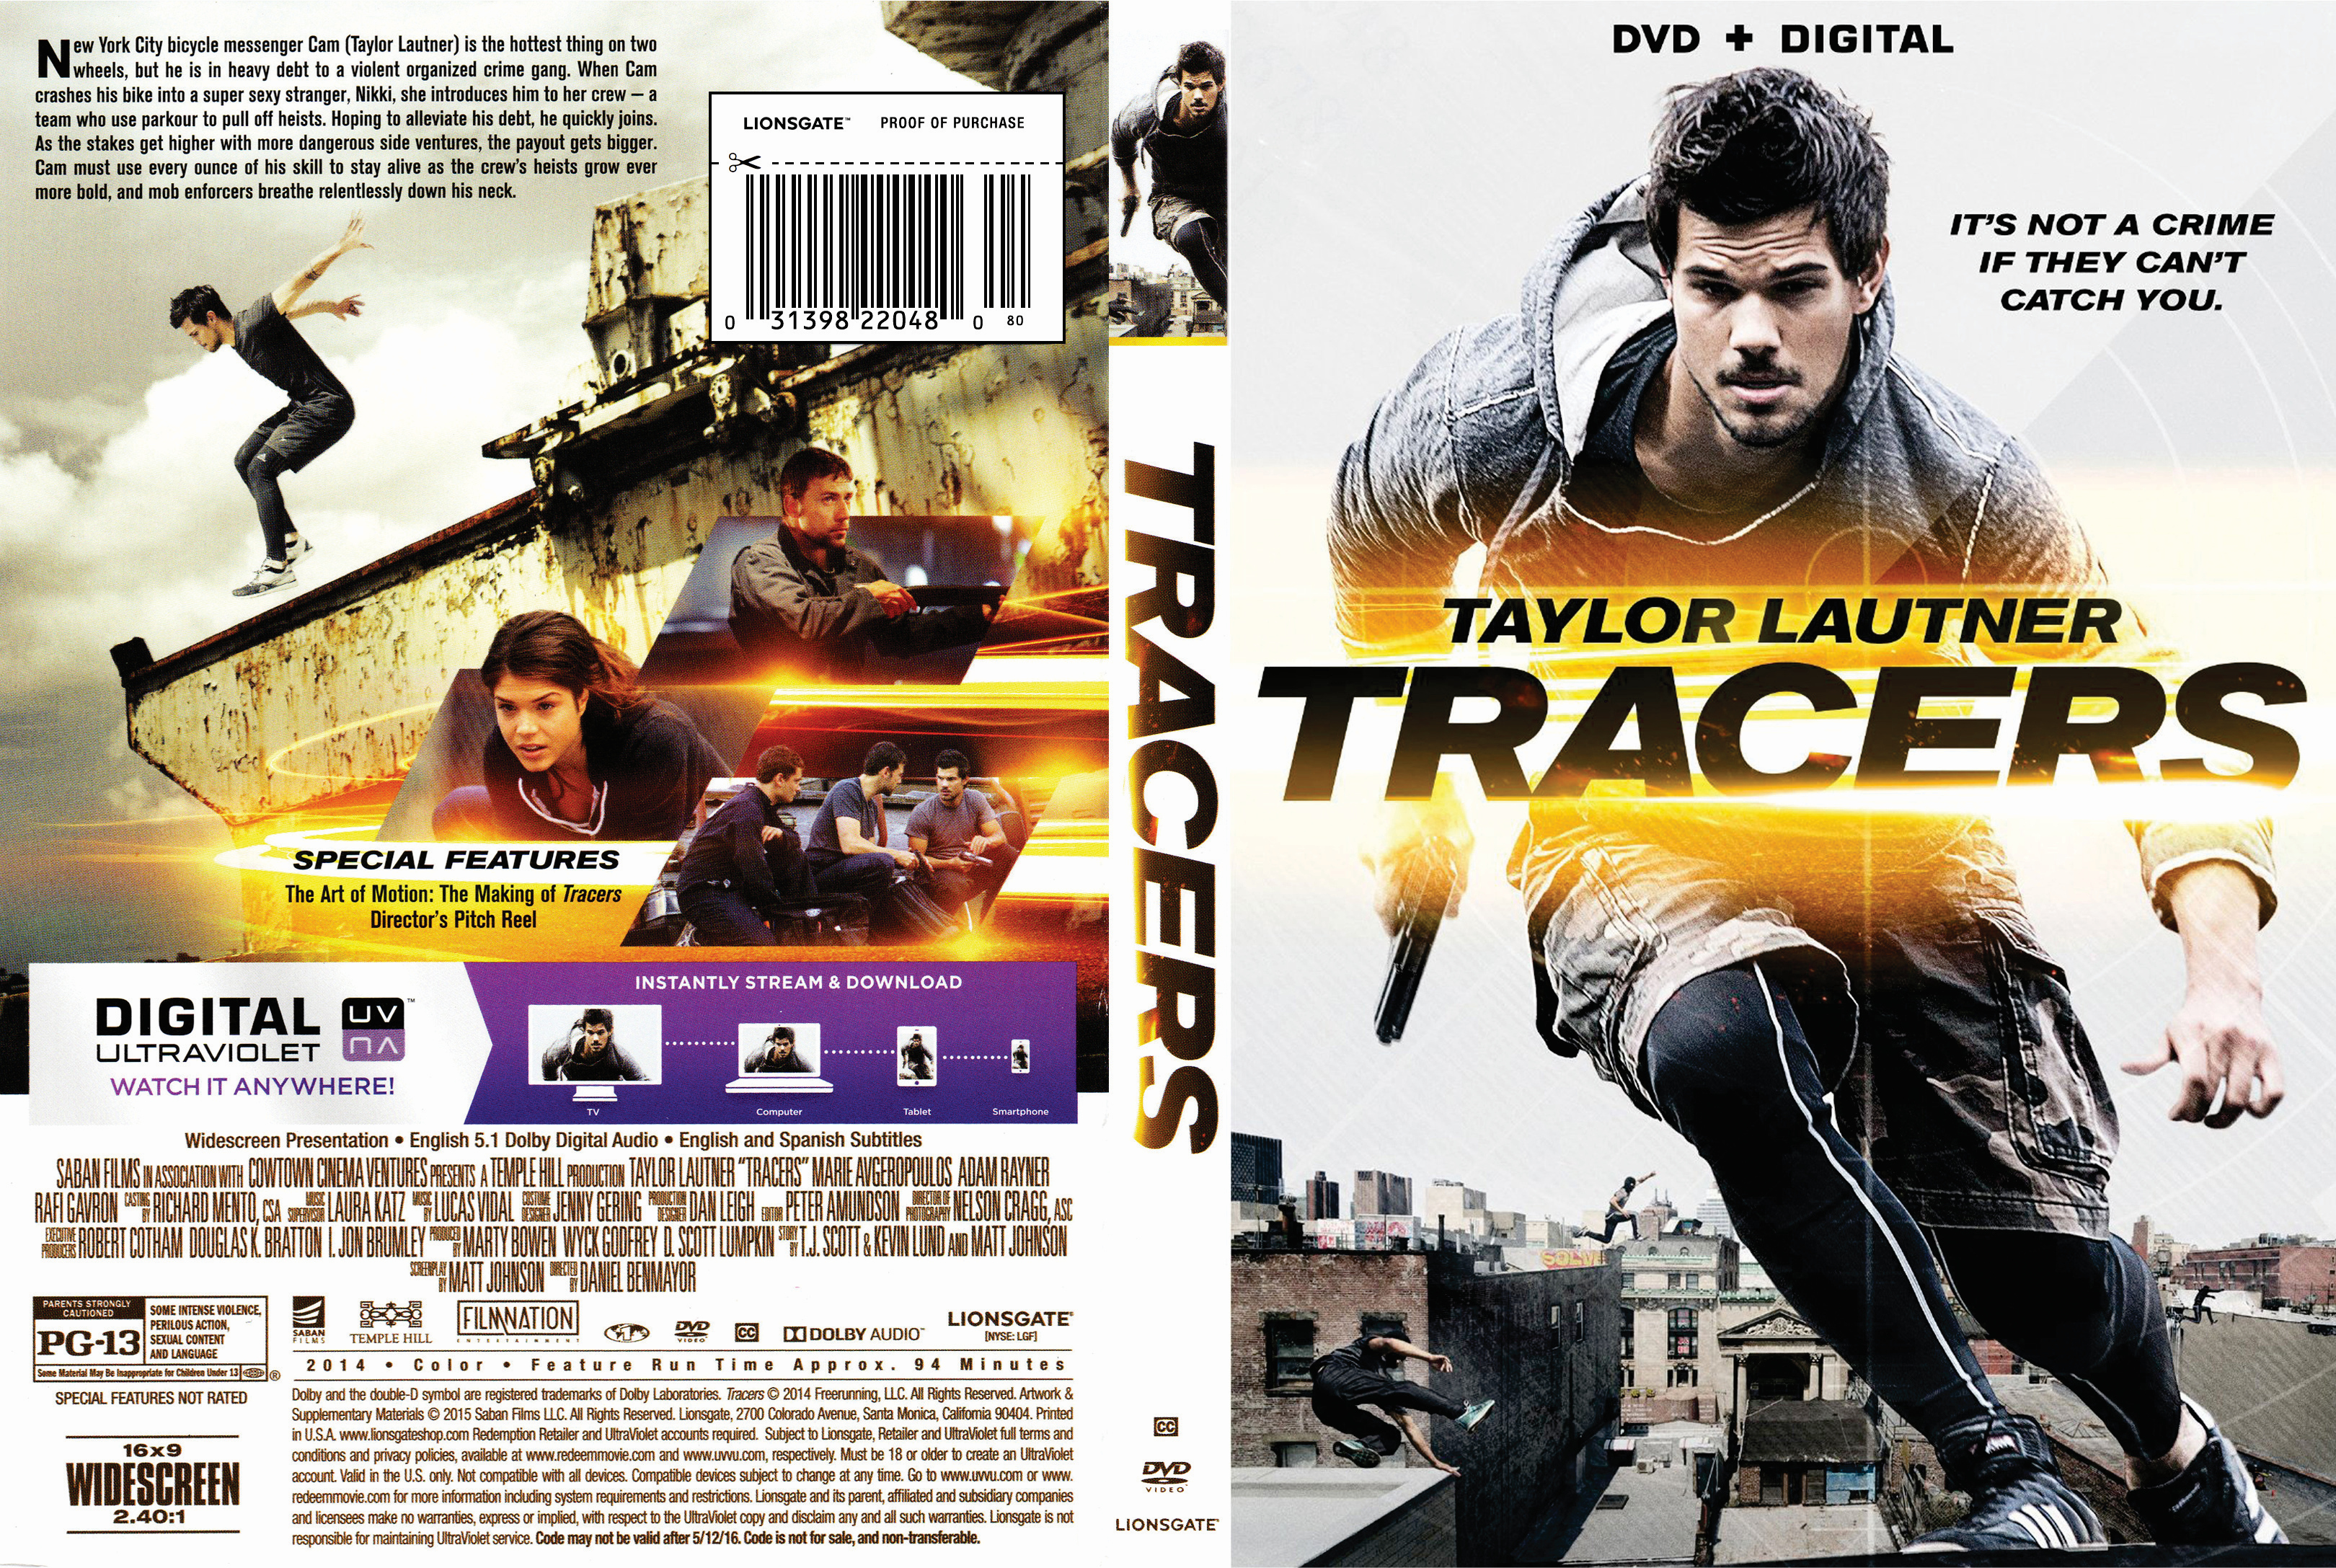 Jaquette DVD Tracers Zone 1